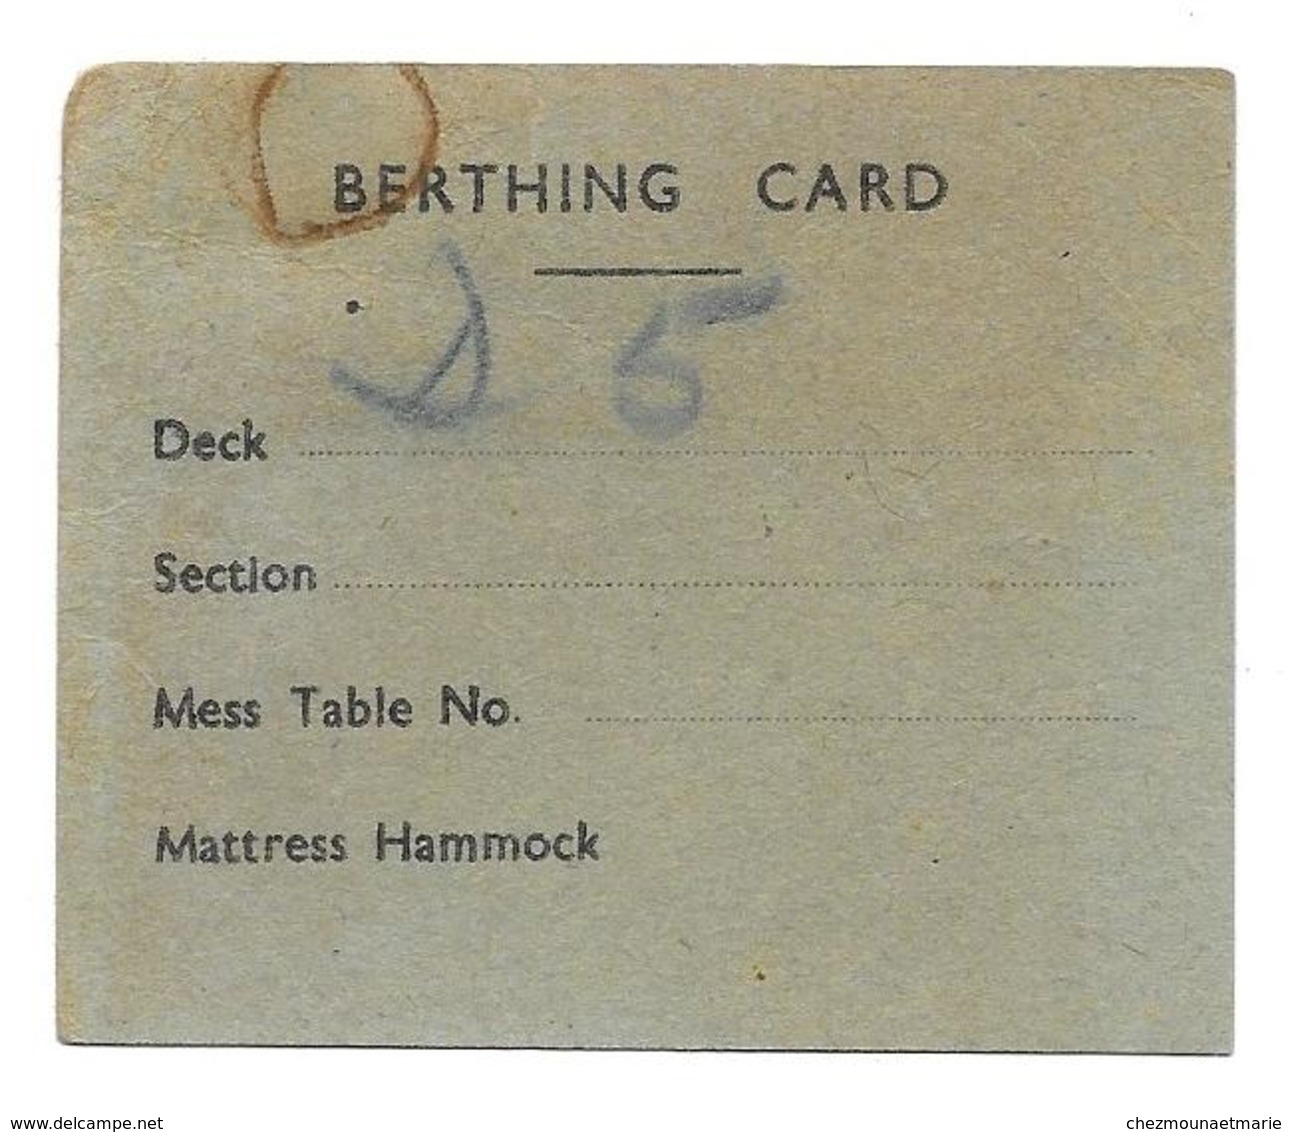 BERTHING CARD - N°5 BOAT DECK AFT N°3 HATCH - FIRE STATION BOAT SATATION - MILITAIRE - Bateaux